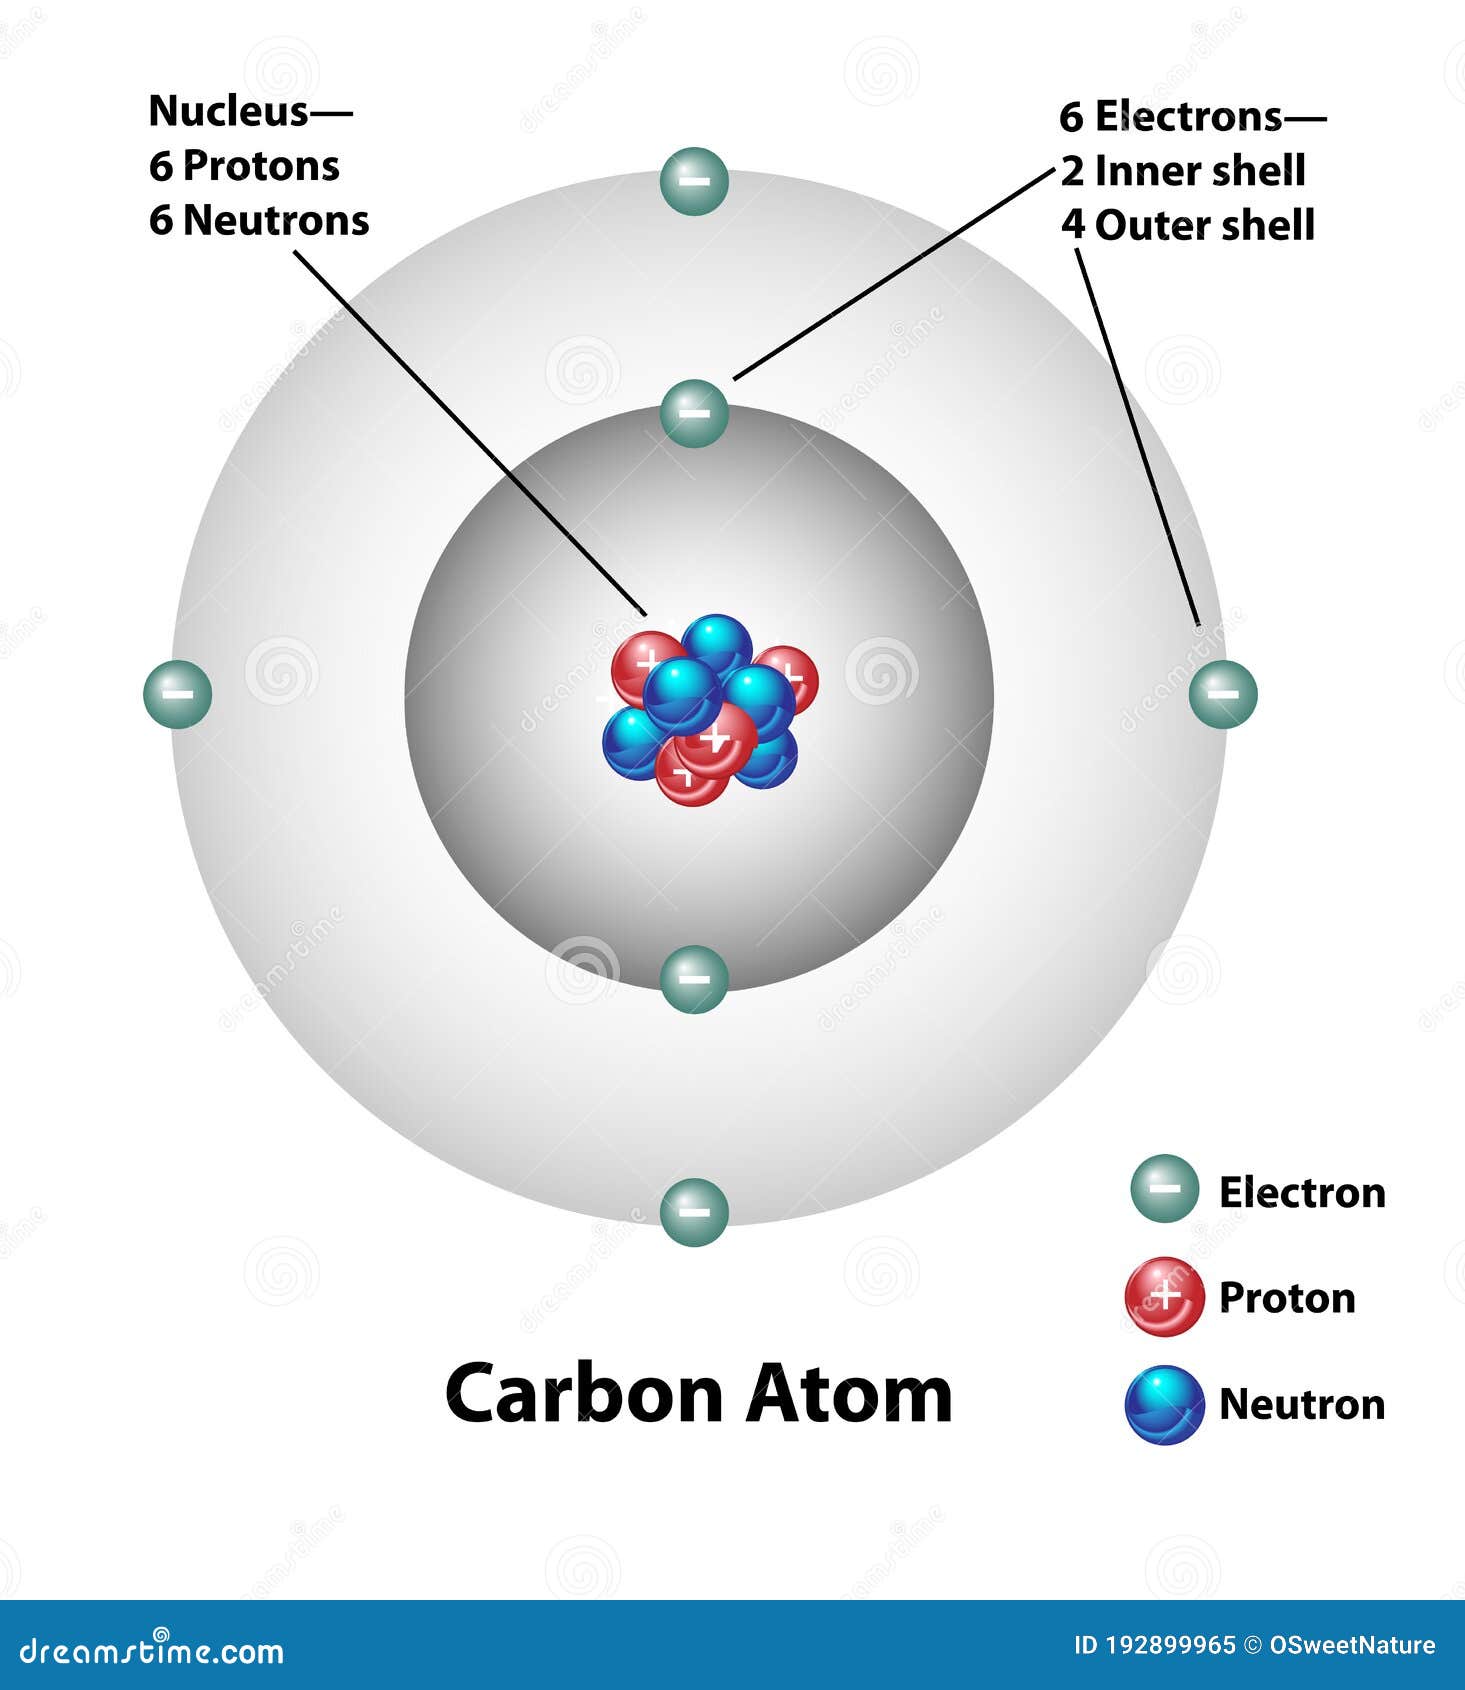 draw-and-label-a-carbon-atom-my-xxx-hot-girl